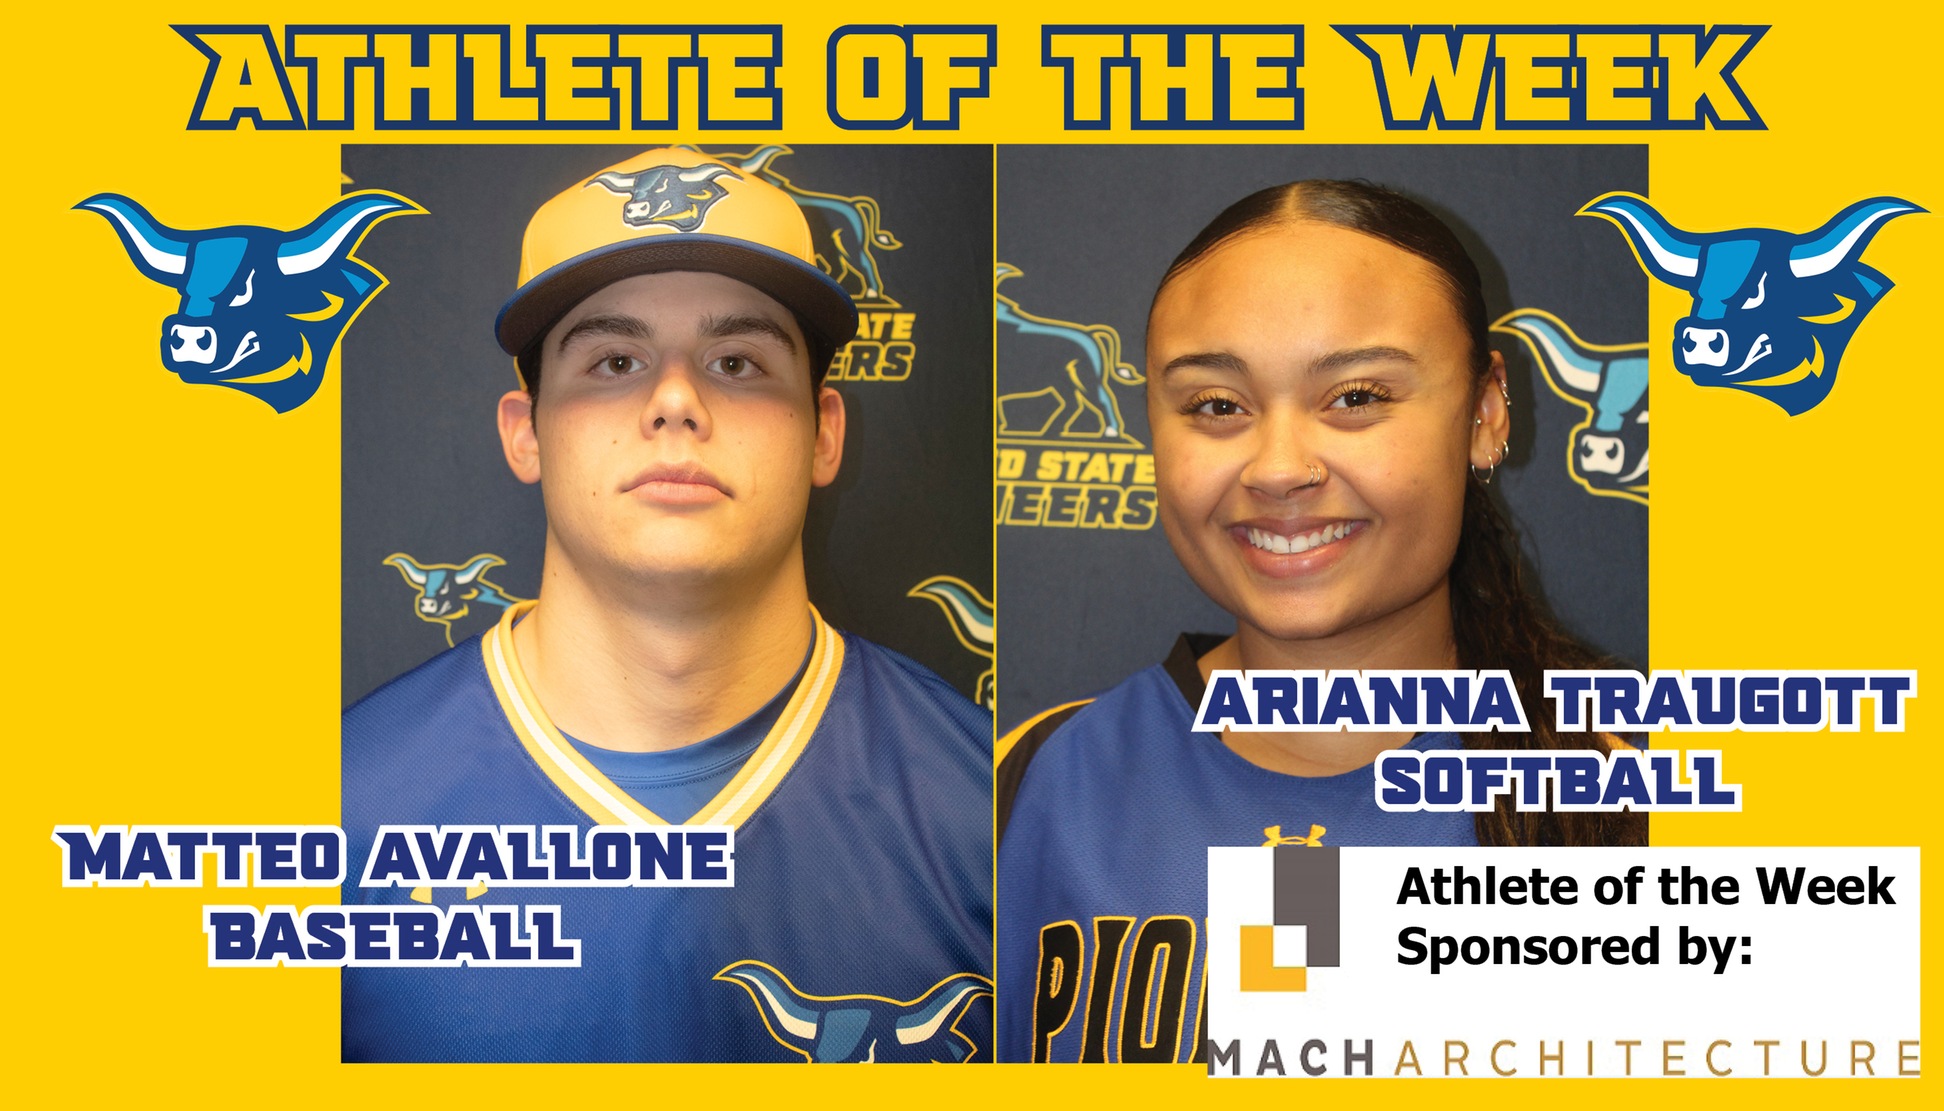 Arianna Traugott and Matteo Avallone named Athletes of the Week